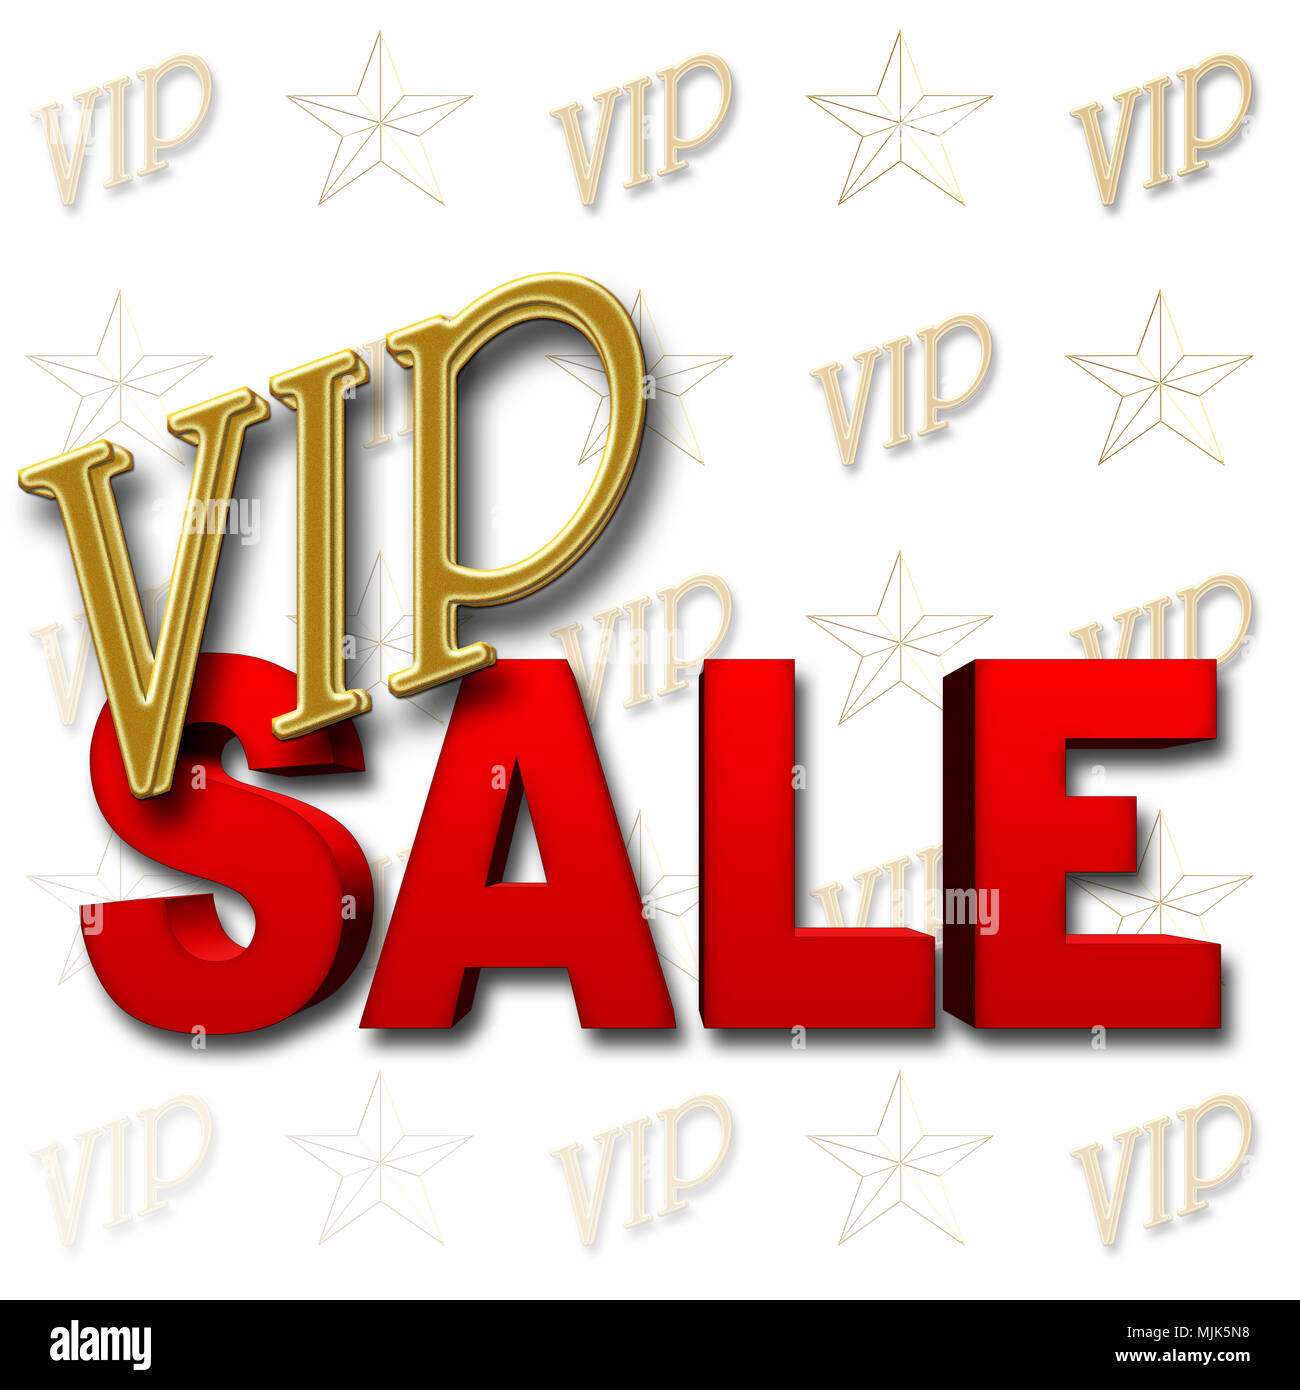 Stock Illustration - Large Red Text: Sale, Golden Text: VIP, 3D Illustratie, Against the White Background. Stock Photo